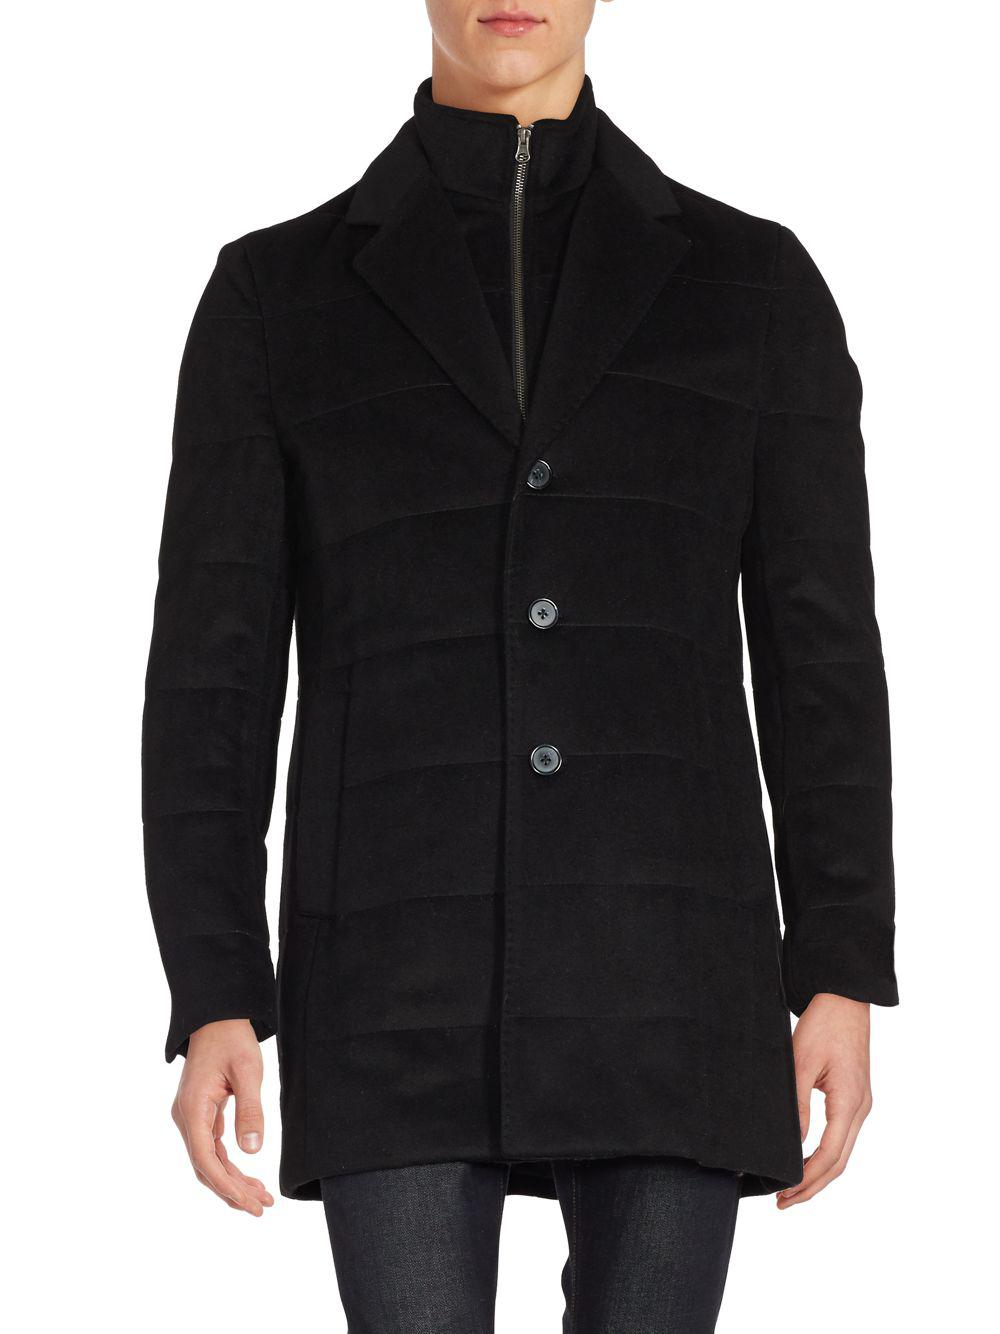 Lyst - Saks Fifth Avenue Quilted Wool-blend Coat in Black for Men